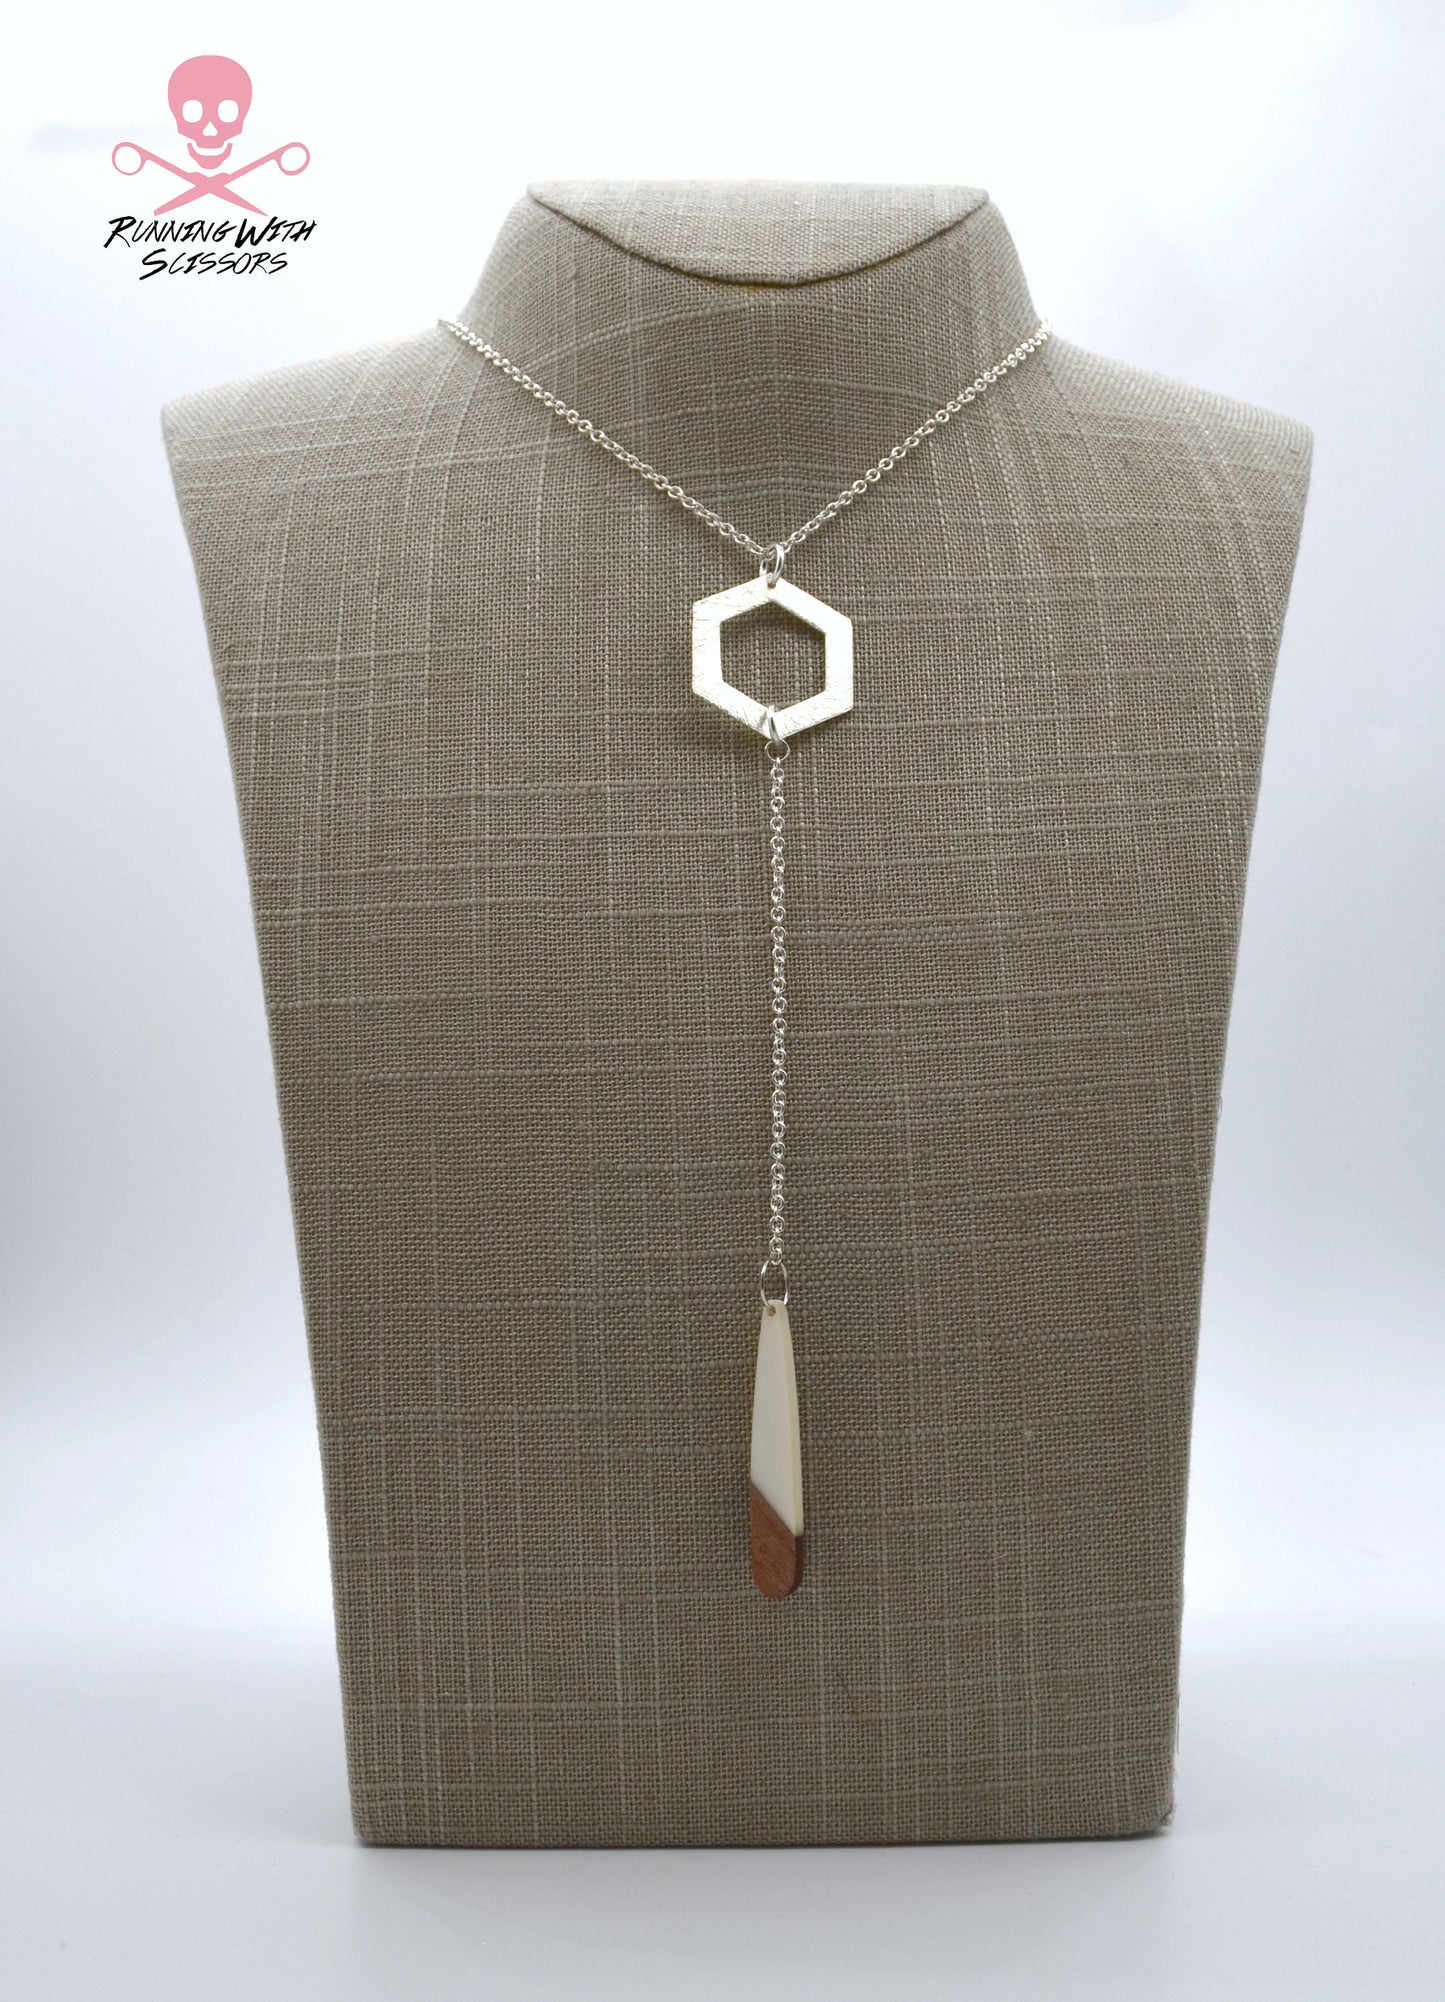 SALE White and Walnut Resin Necklace